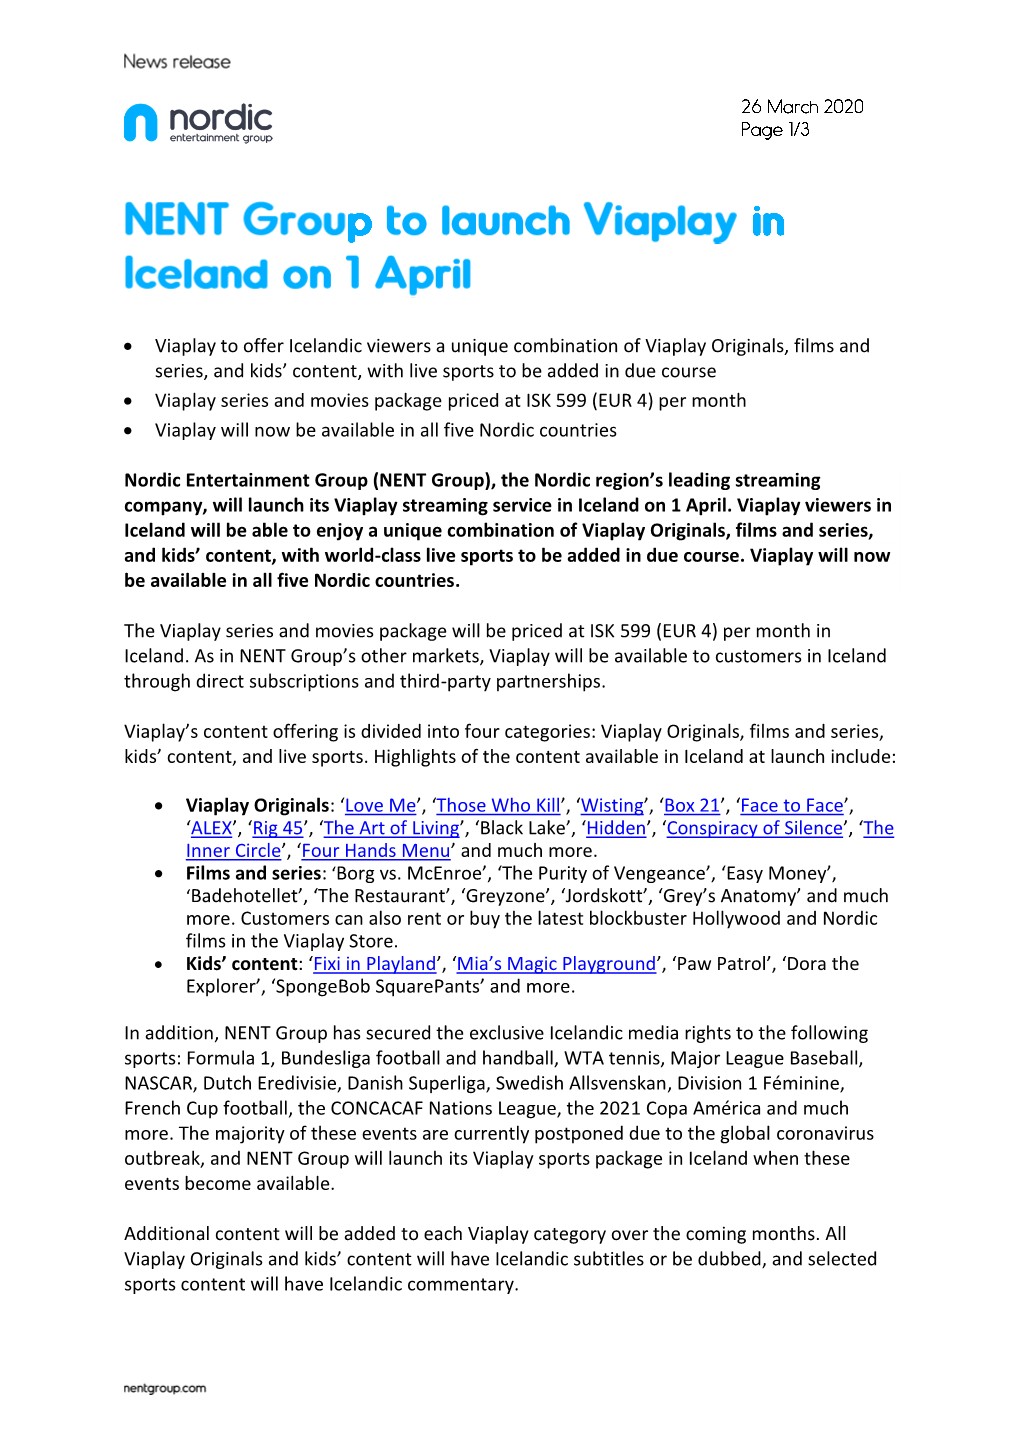 Viaplay to Offer Icelandic Viewers a Unique Combination Of